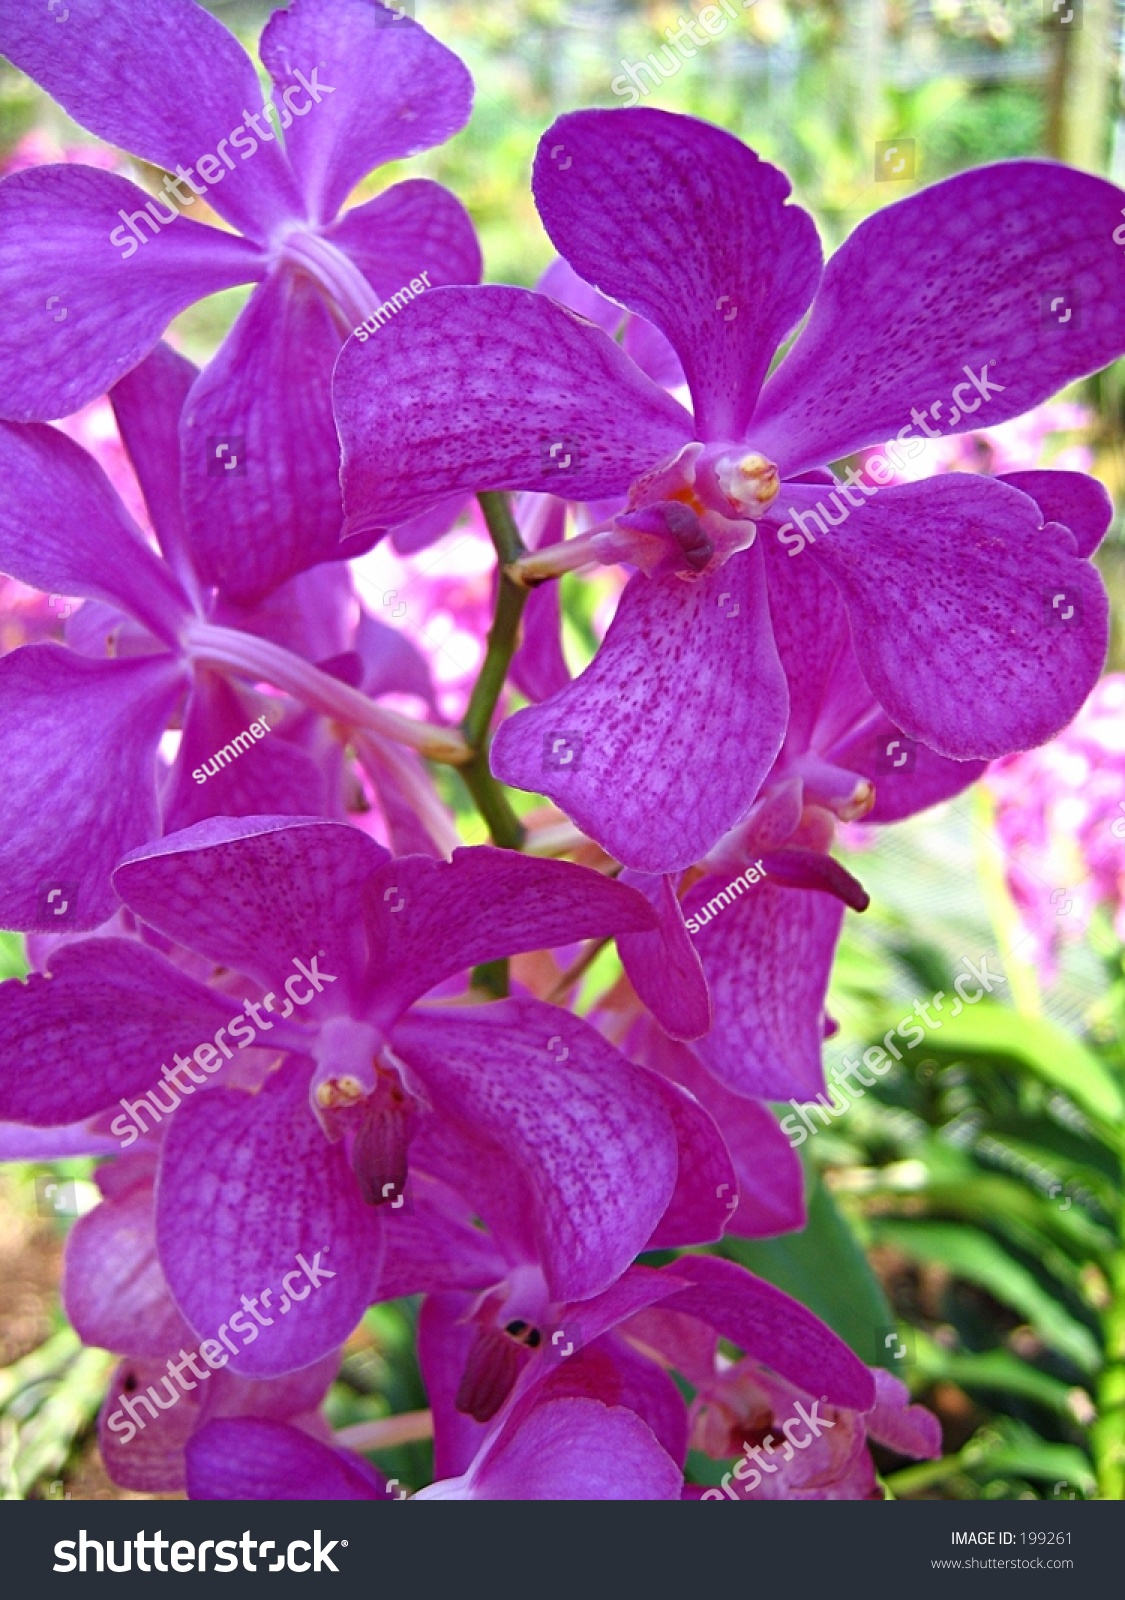 Orchid, Singapore National Flower Stock Photo 199261 : Shutterstock